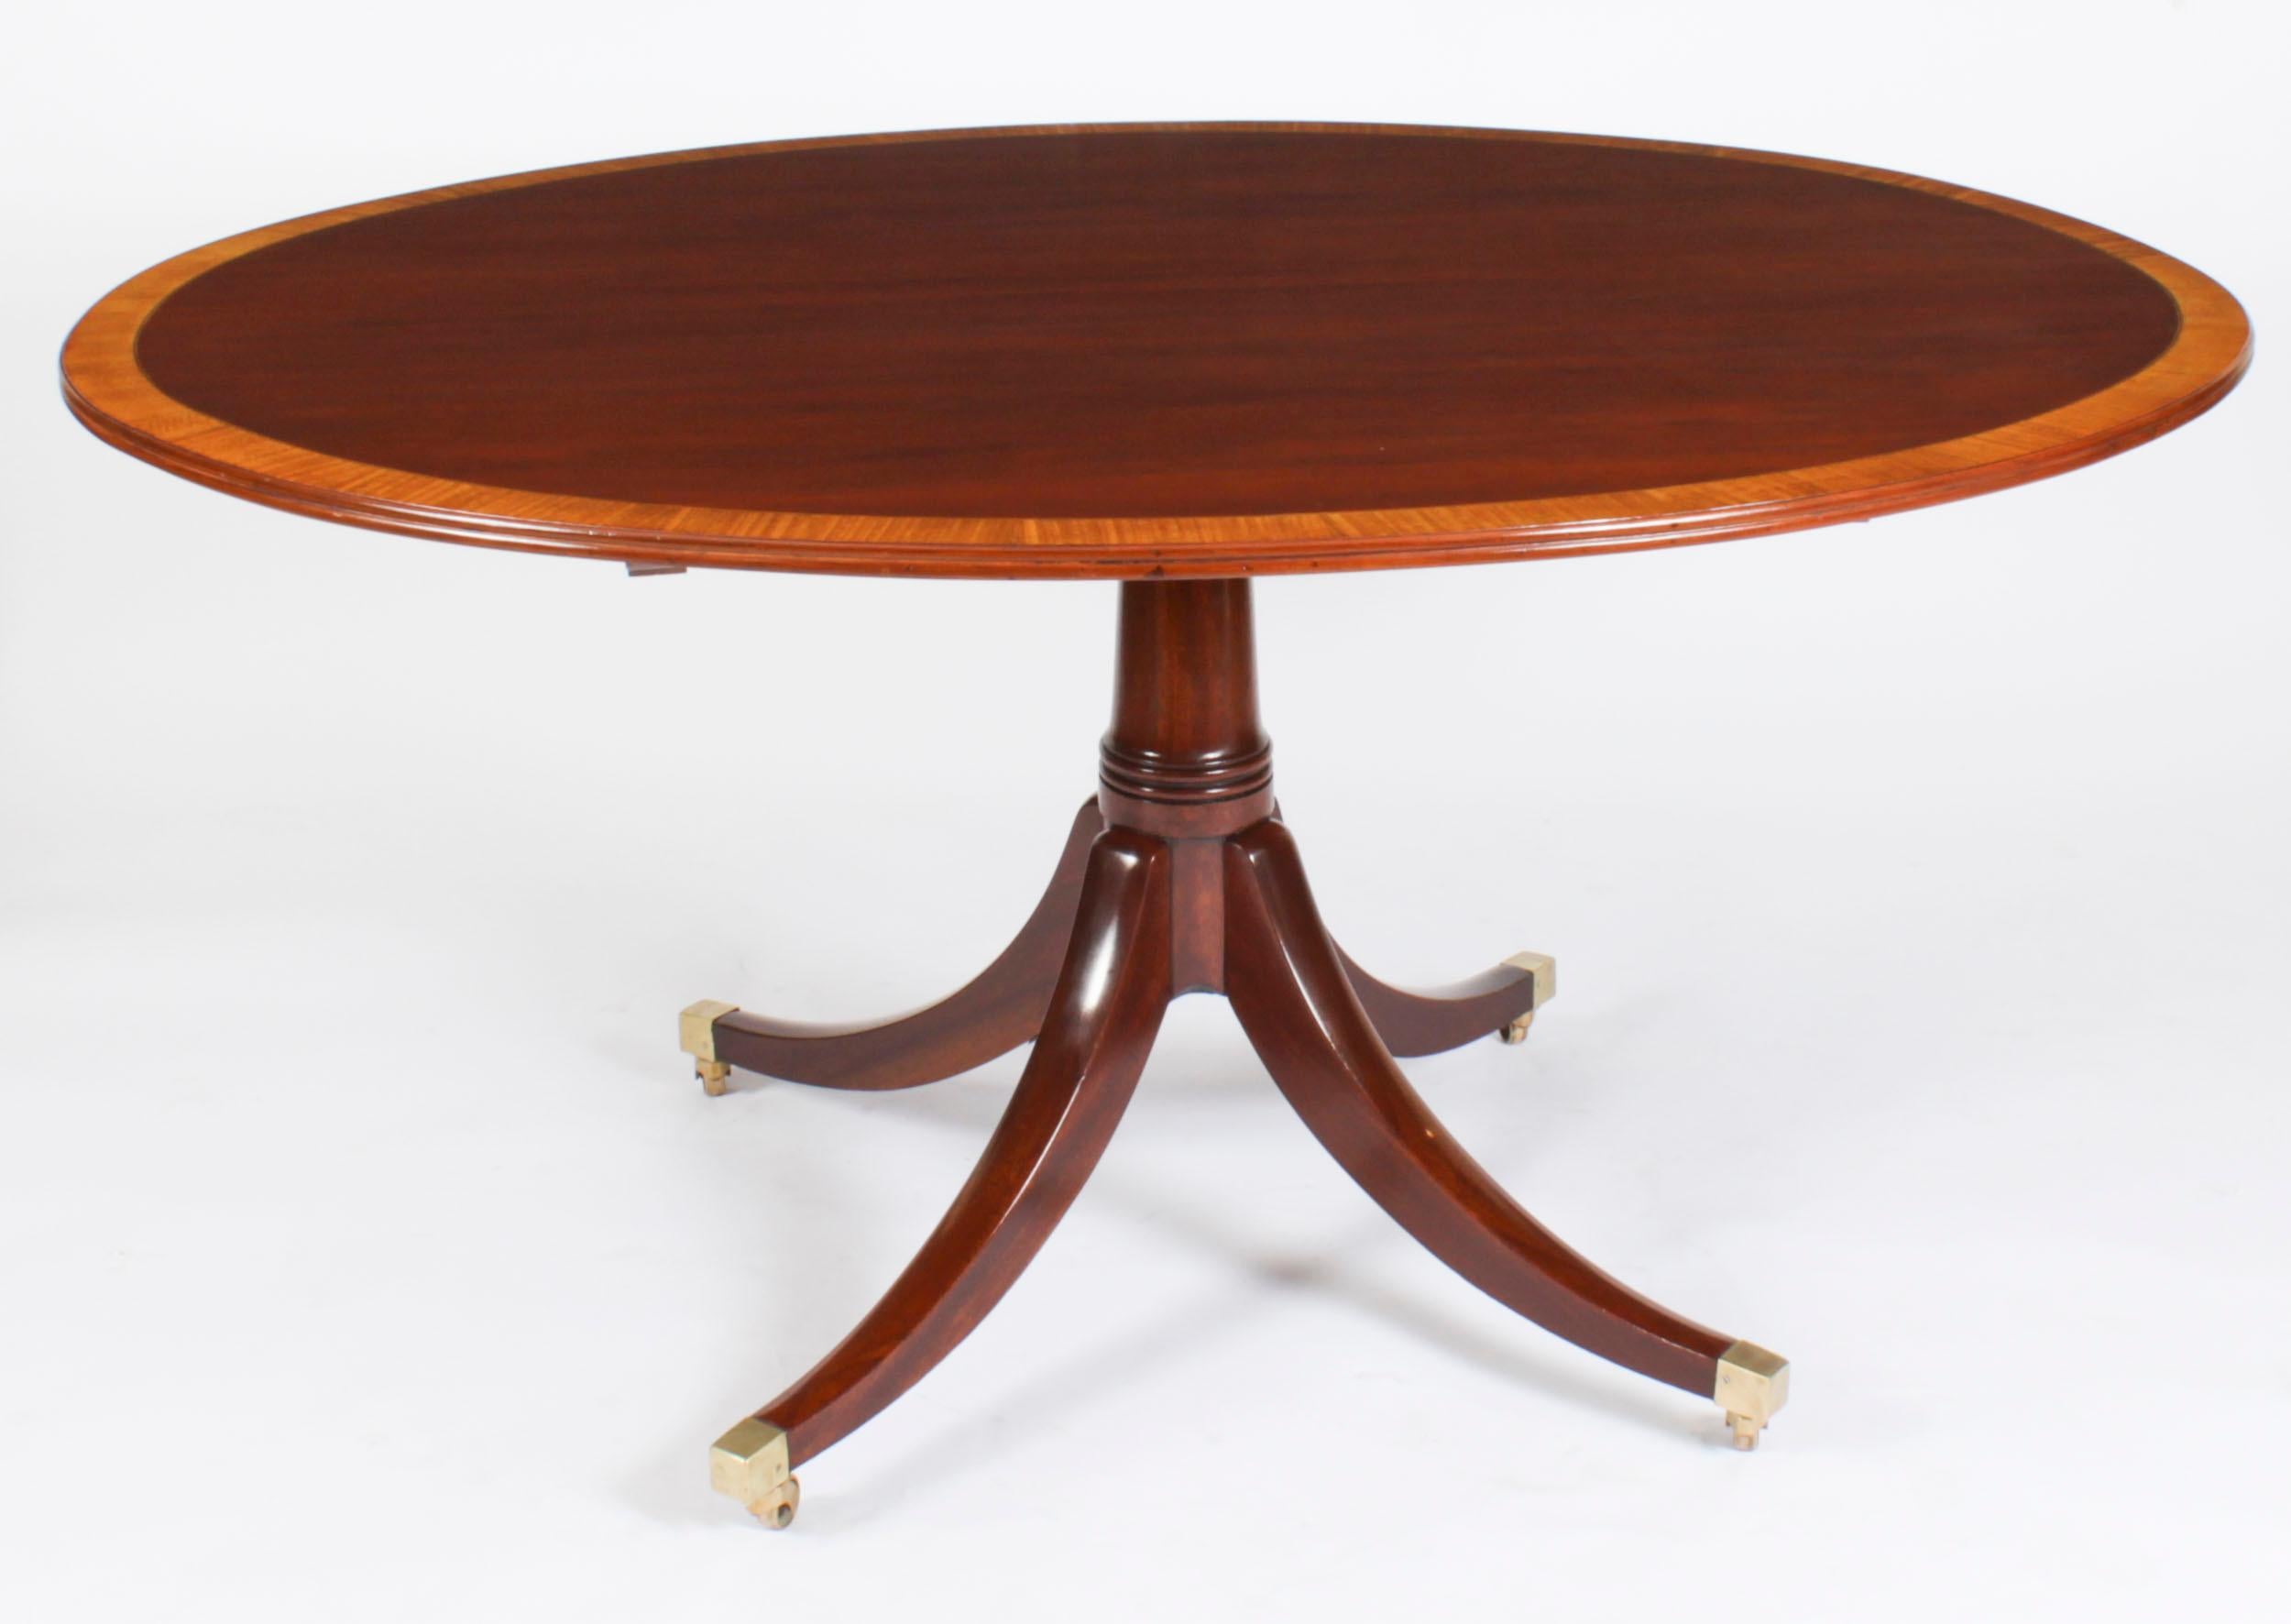 Regency Revival Antique Oval Mahogany Tilt Top Dining Table, Early 20th Century For Sale